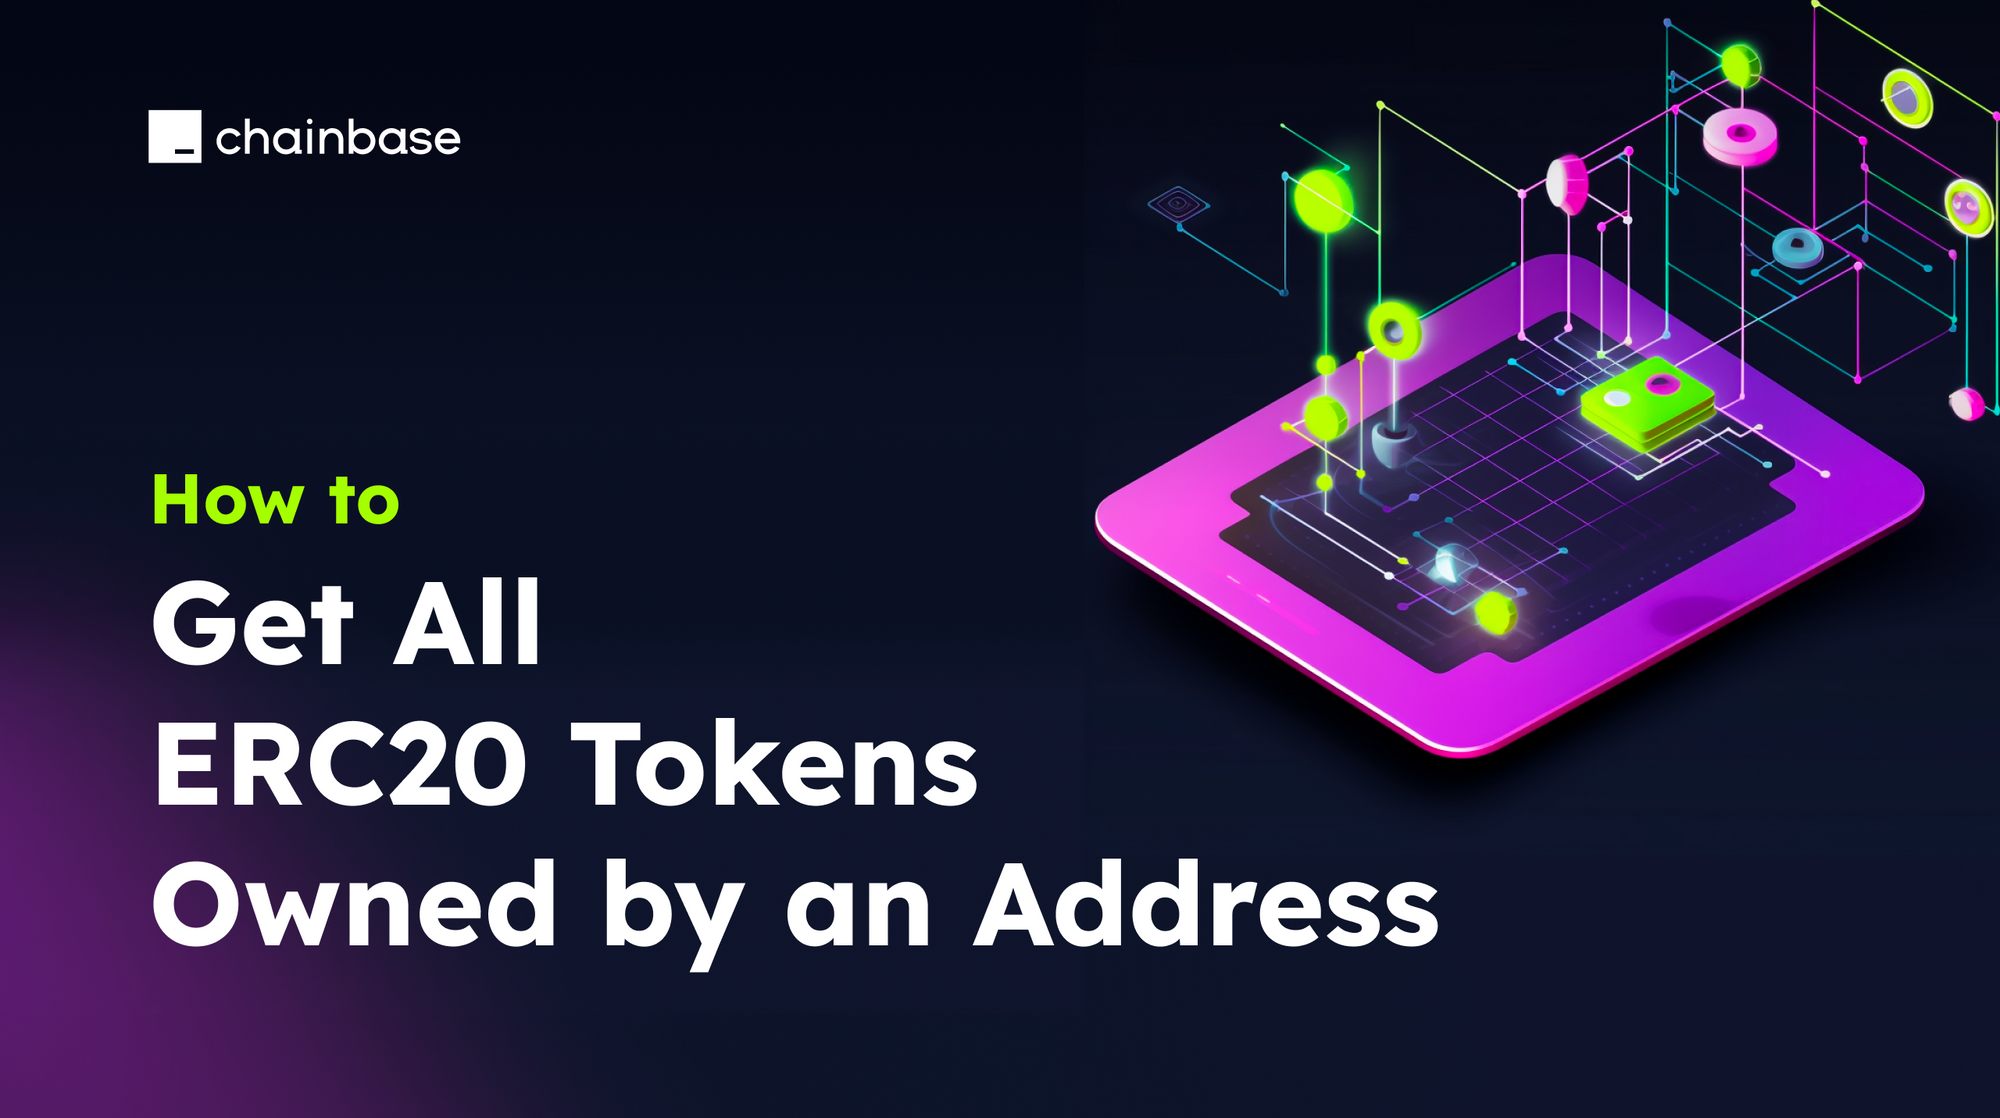 How to Get All ERC20 Tokens Owned by an Address